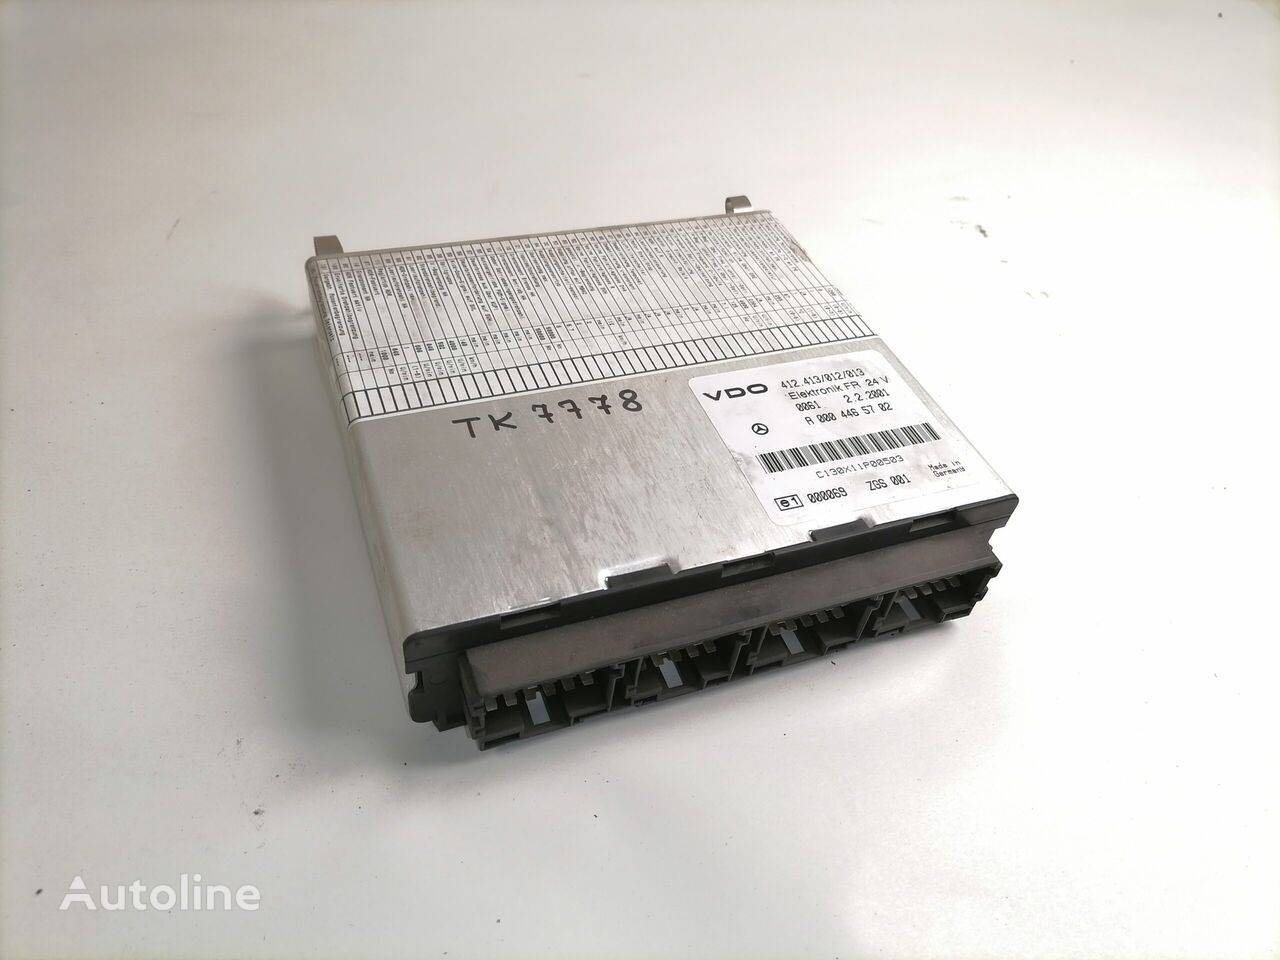 MB Juhtplokk, FR A0004465702 control unit for MB Atego truck tractor